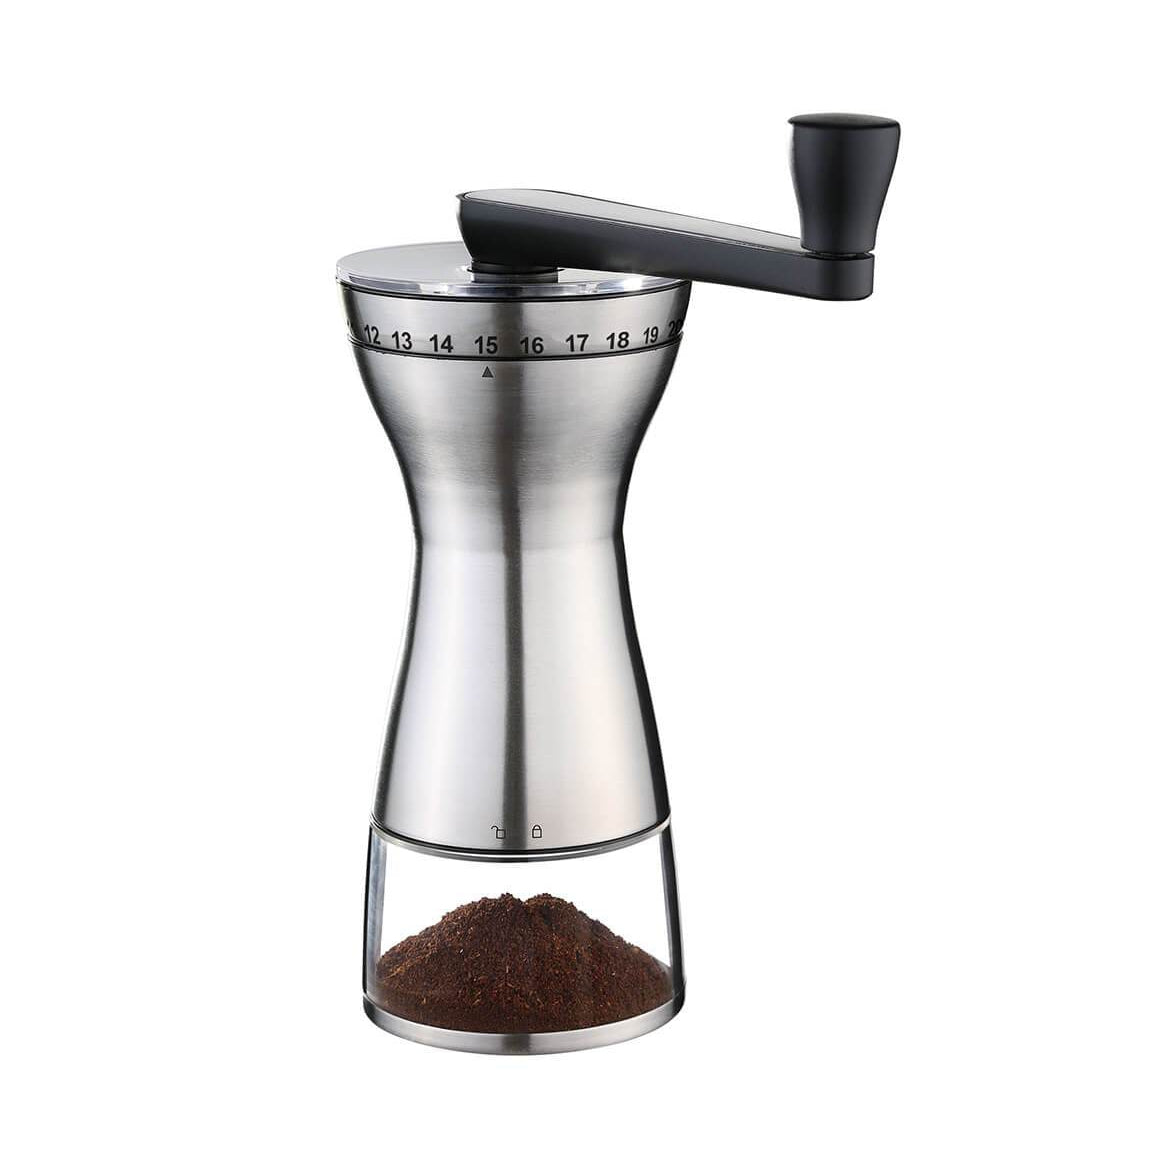 Manaos Coffee Grinder with Grind Selector